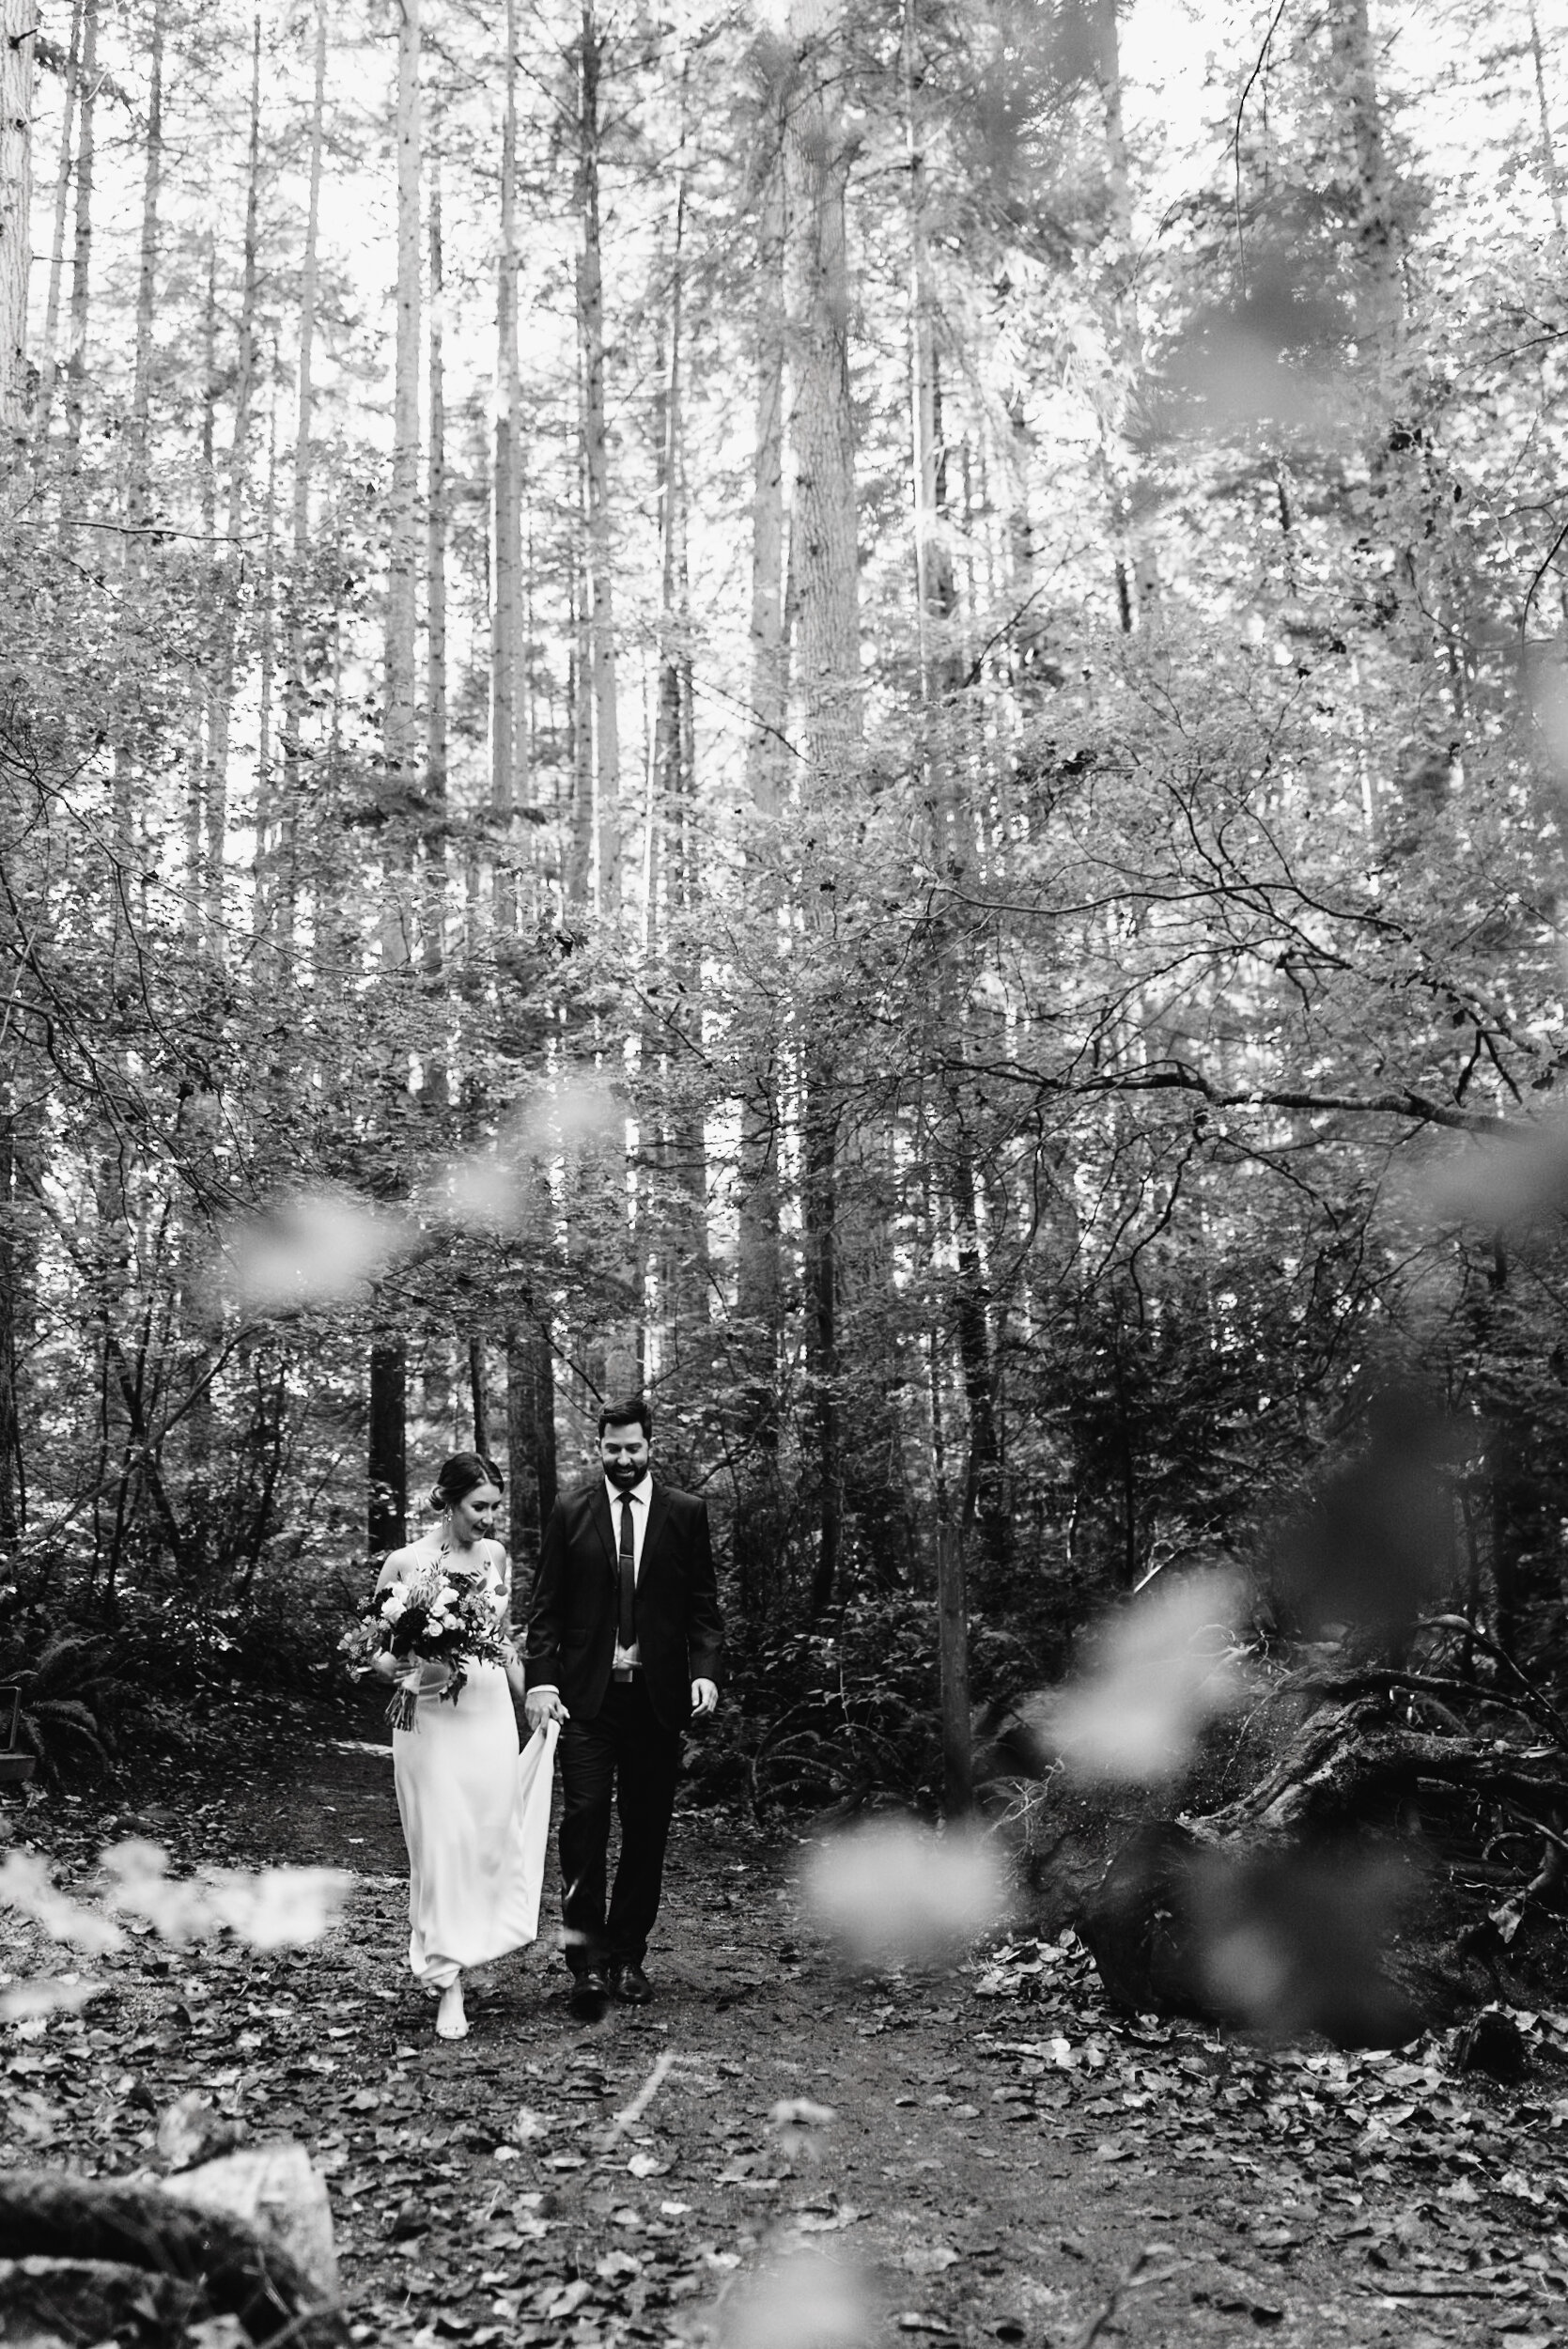 Bride and Groom walk through forest black and white